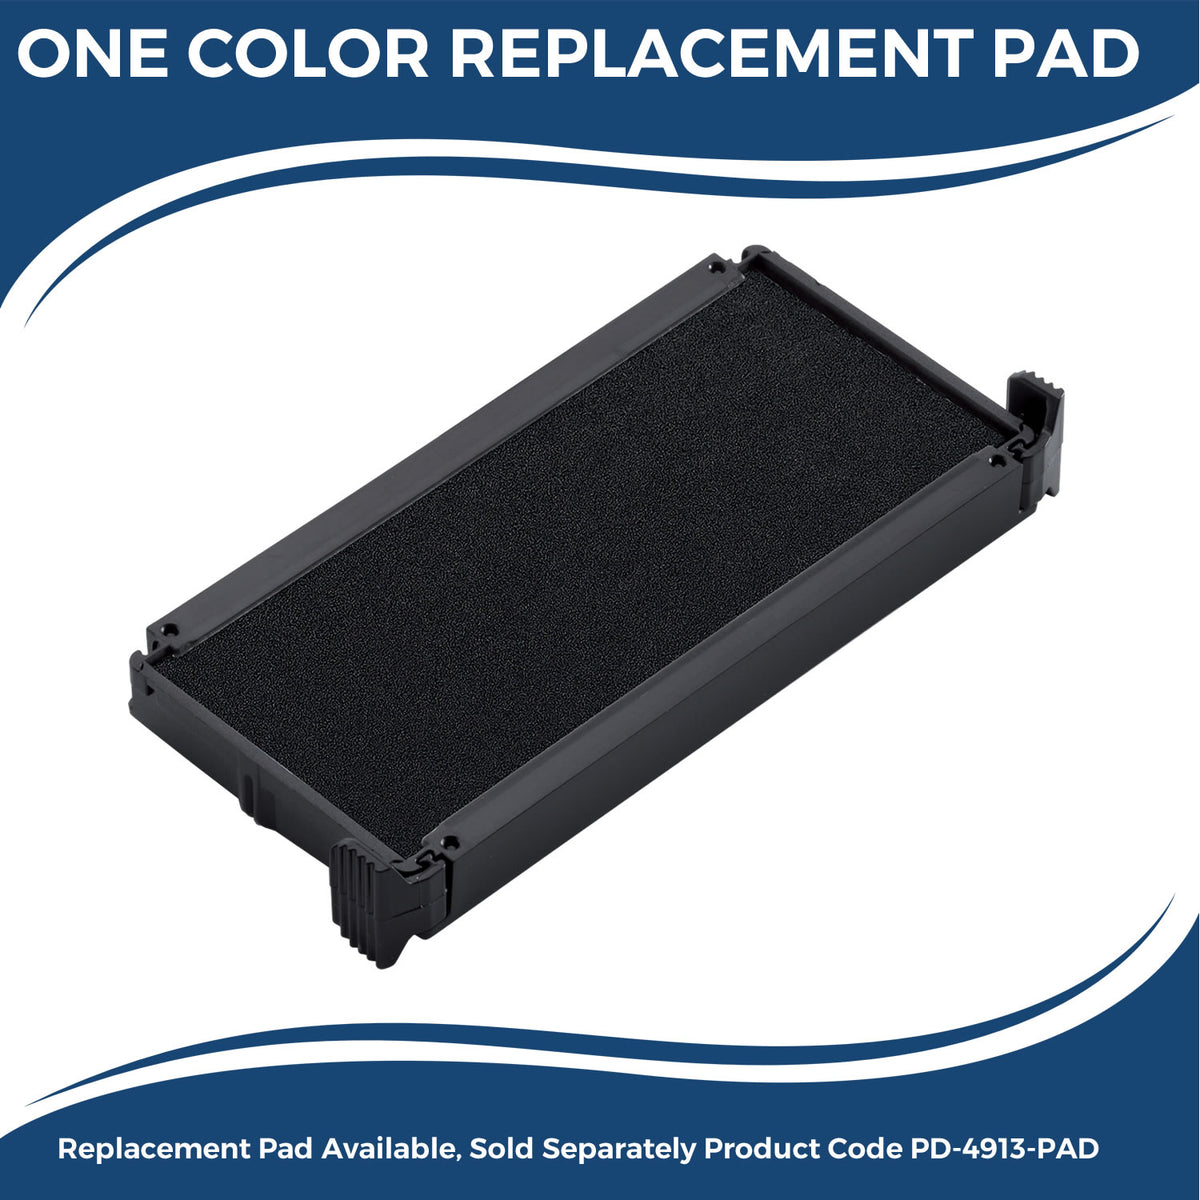 Large Self-Inking Covid-19 Tested Stamp 5514S Large Replacment Pad